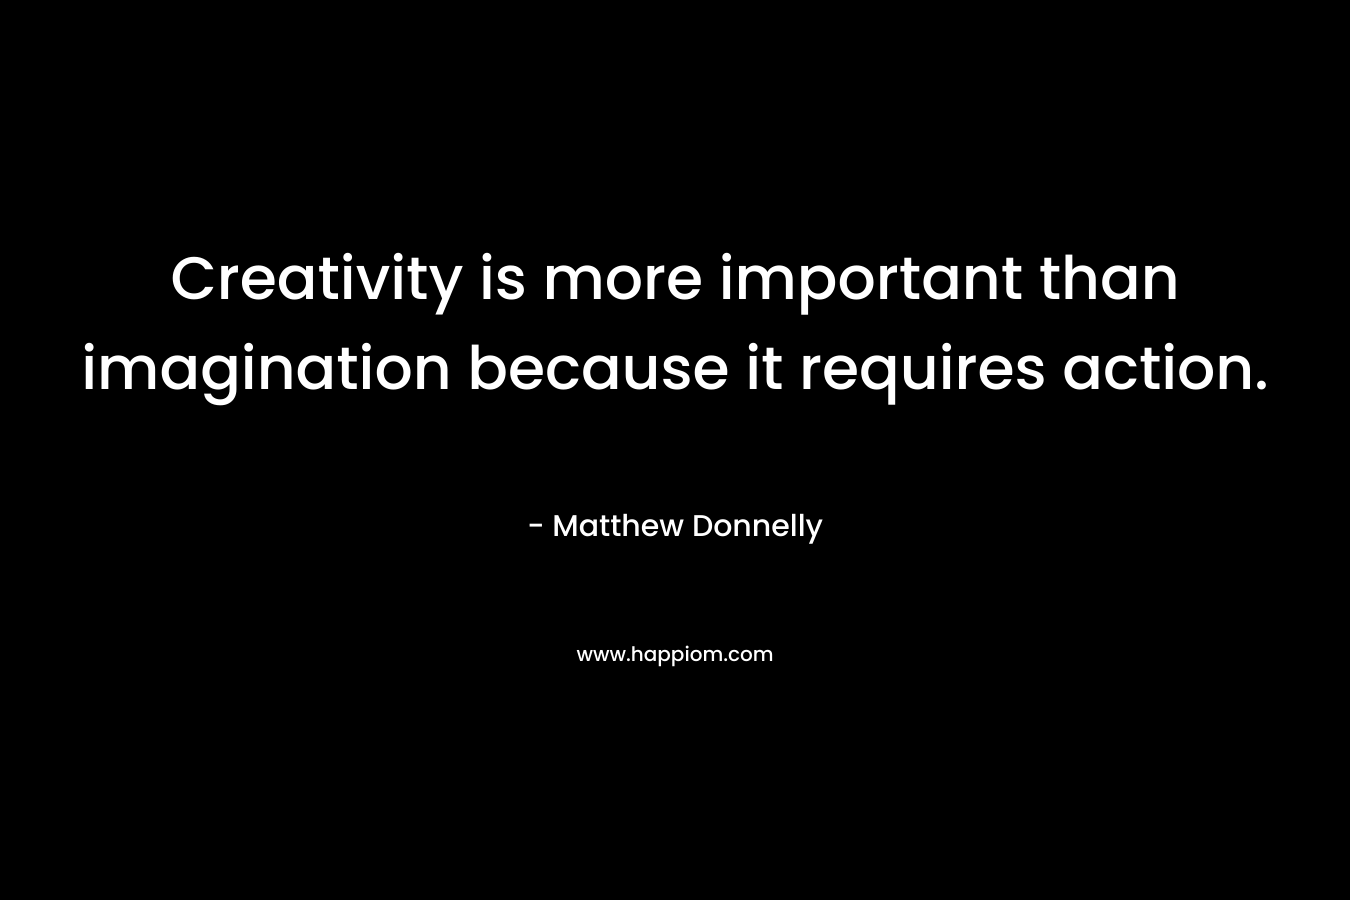 Creativity is more important than imagination because it requires action.